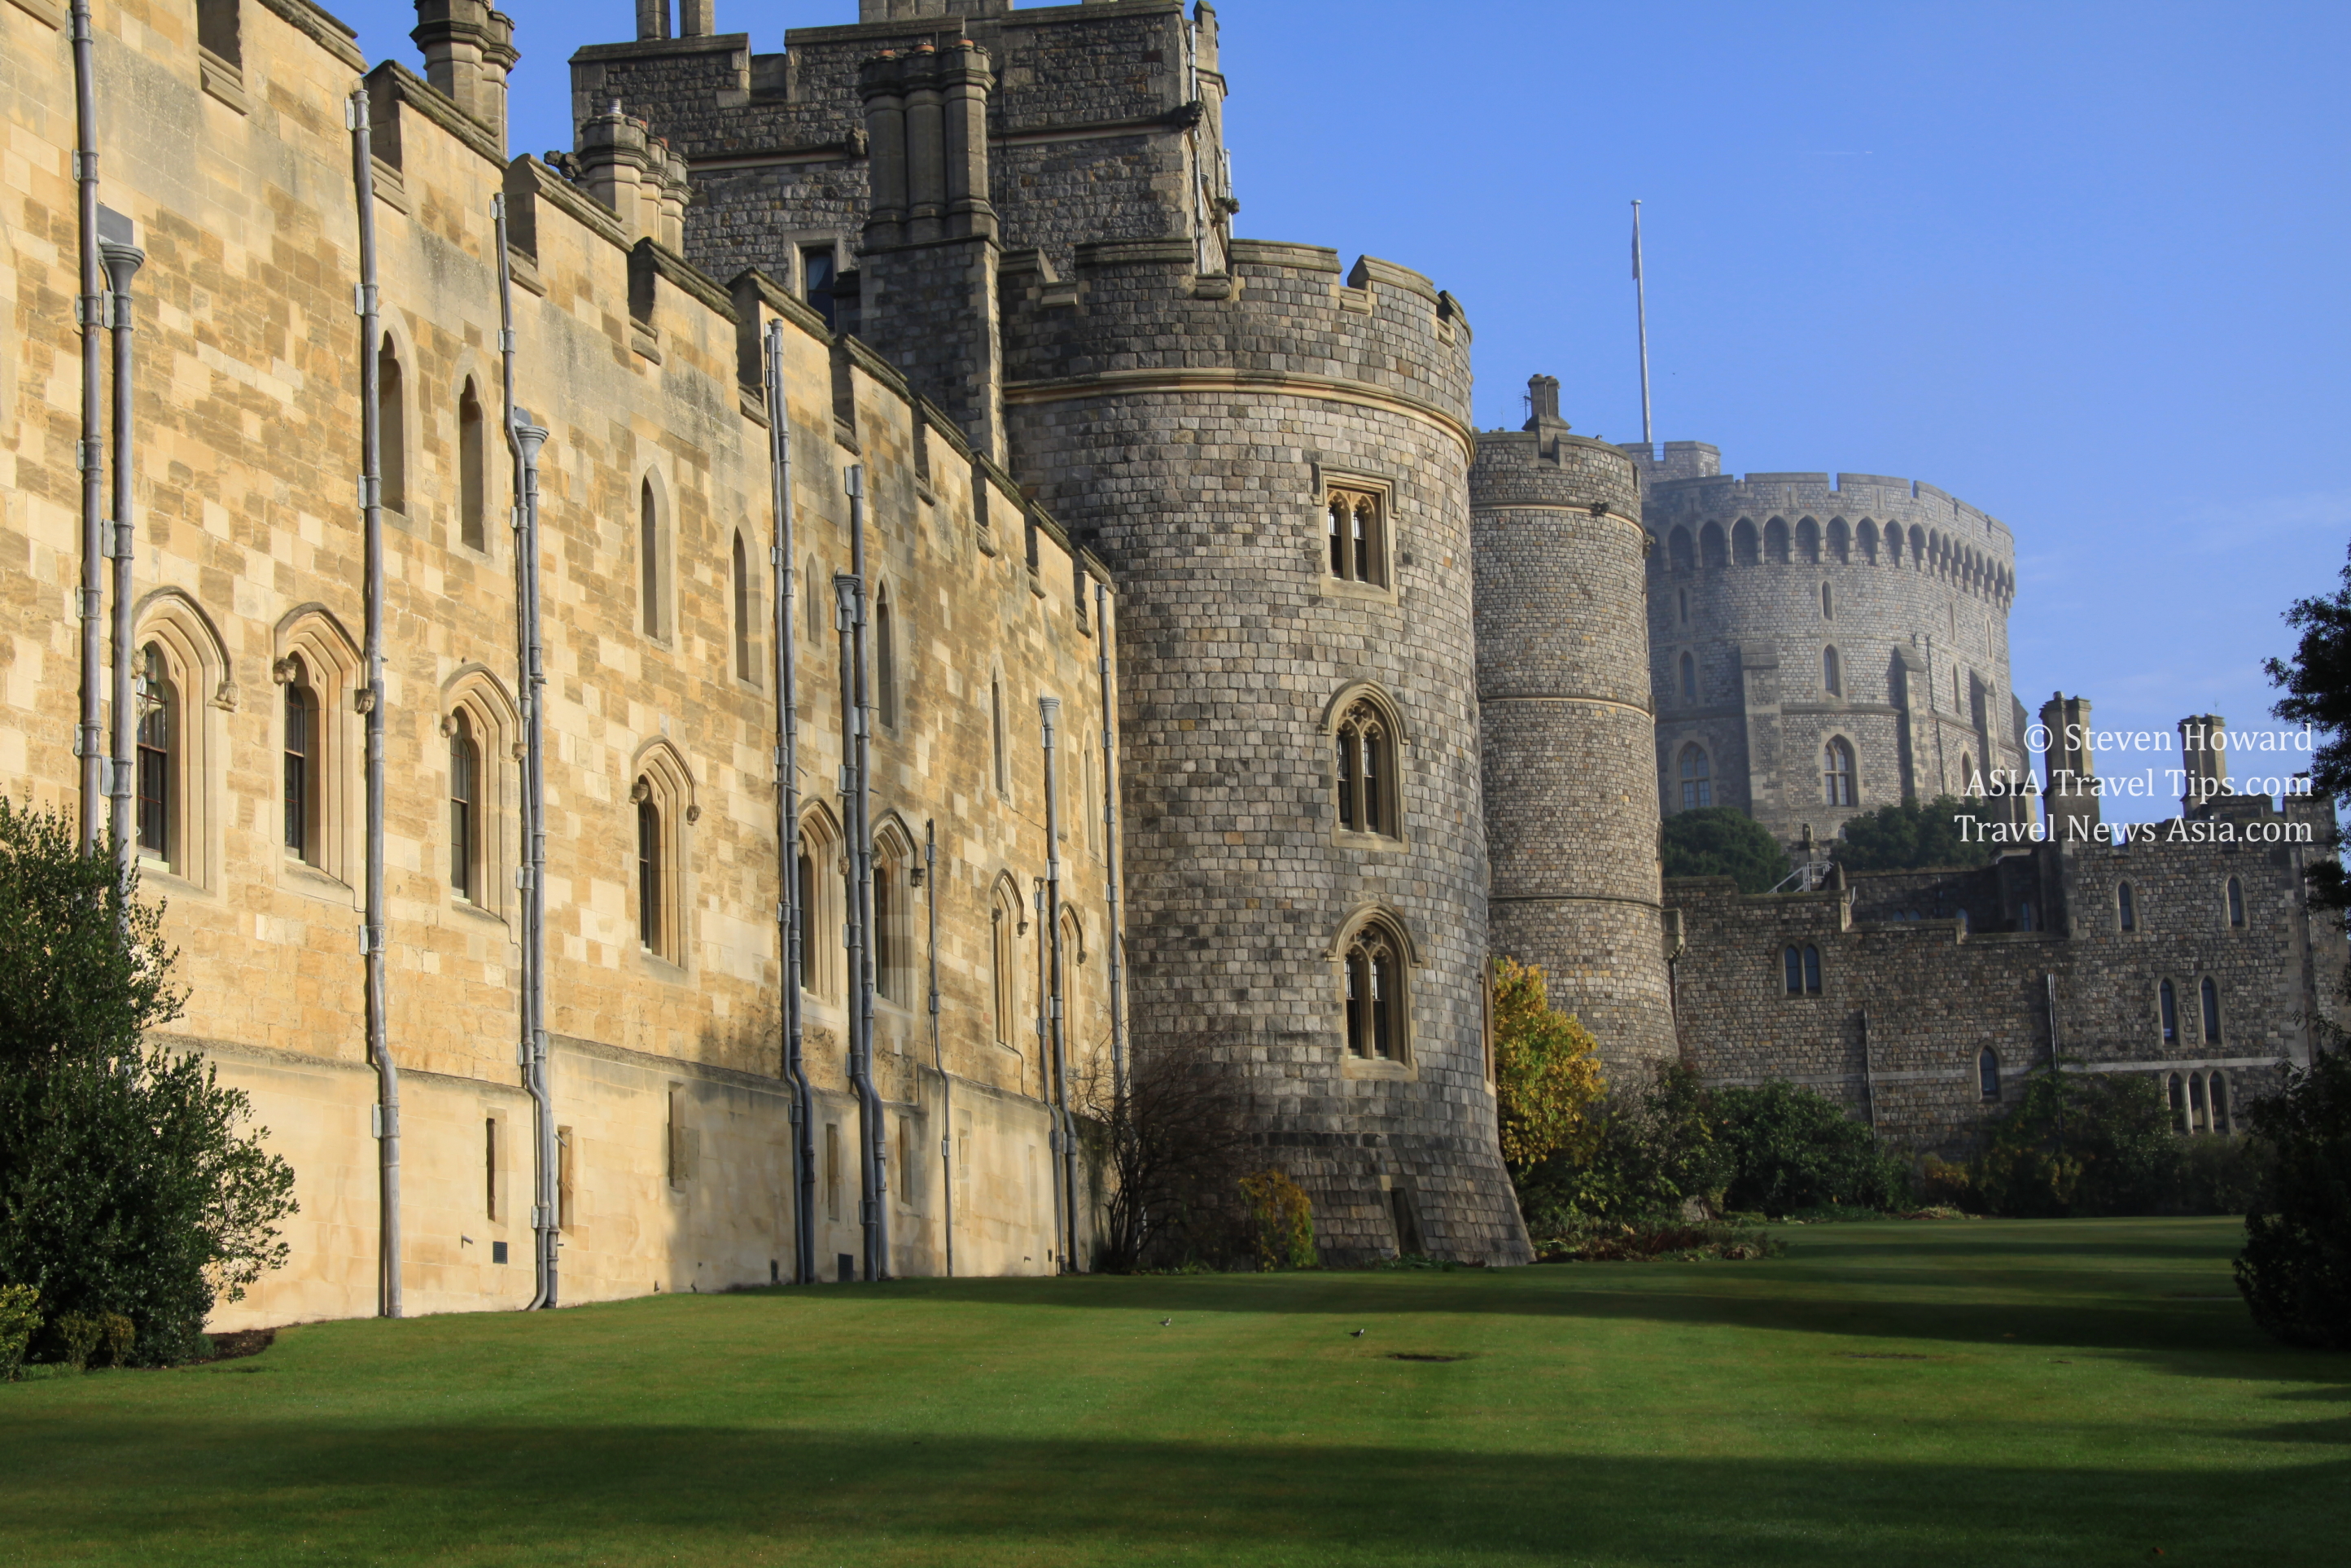 Windsor Castle, England. Picture by Steven Howard of TravelNewsAsia.com Click to enlarge.